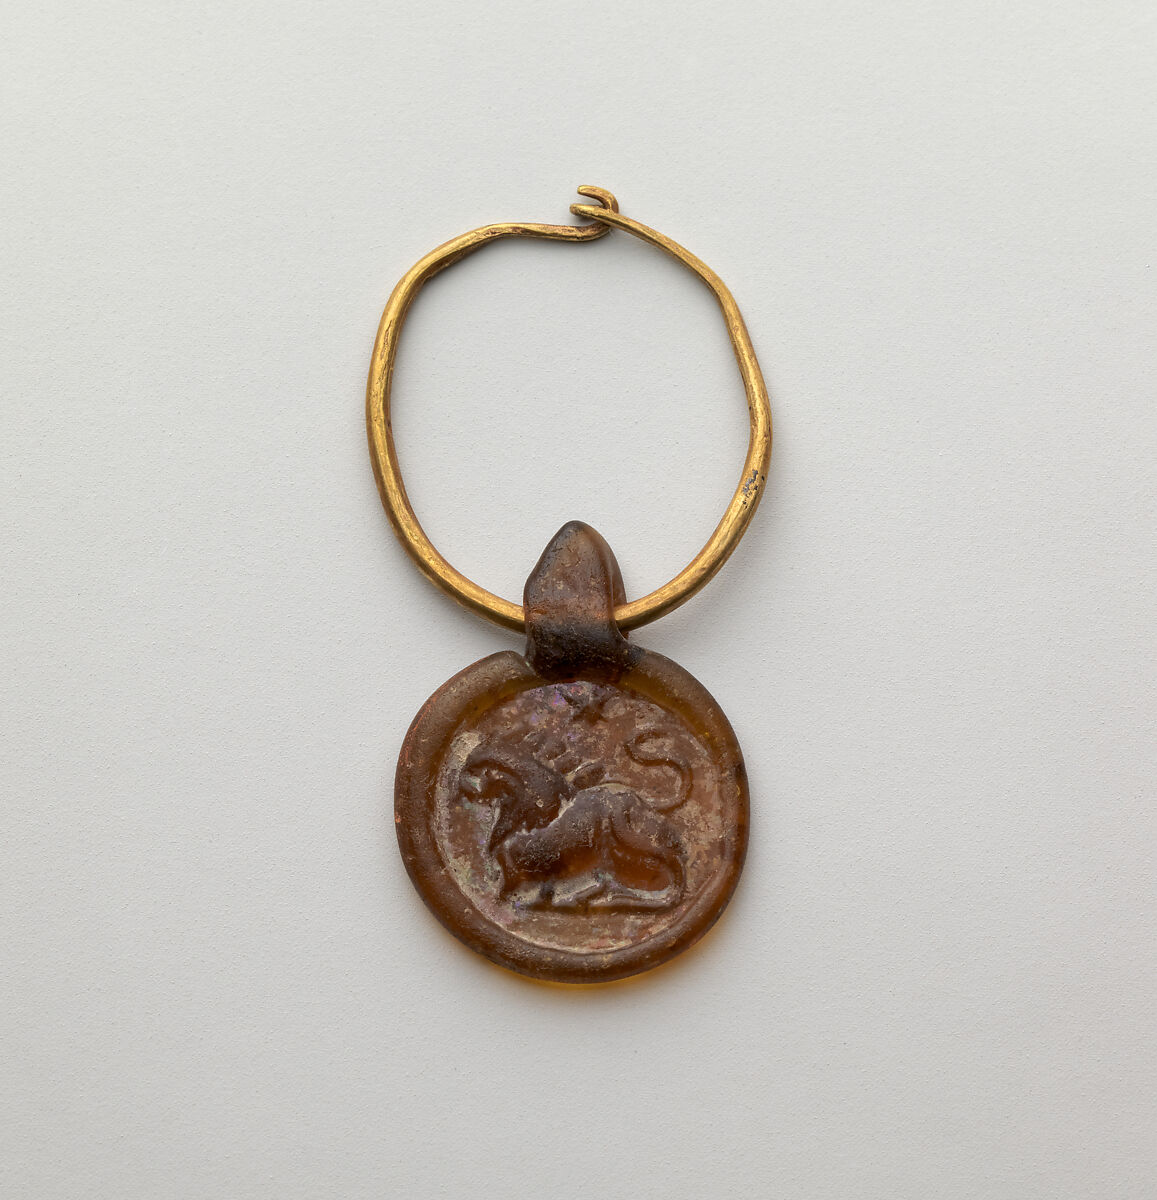 Gold hoop with glass pendant stamped disk, Gold, glass, Roman 